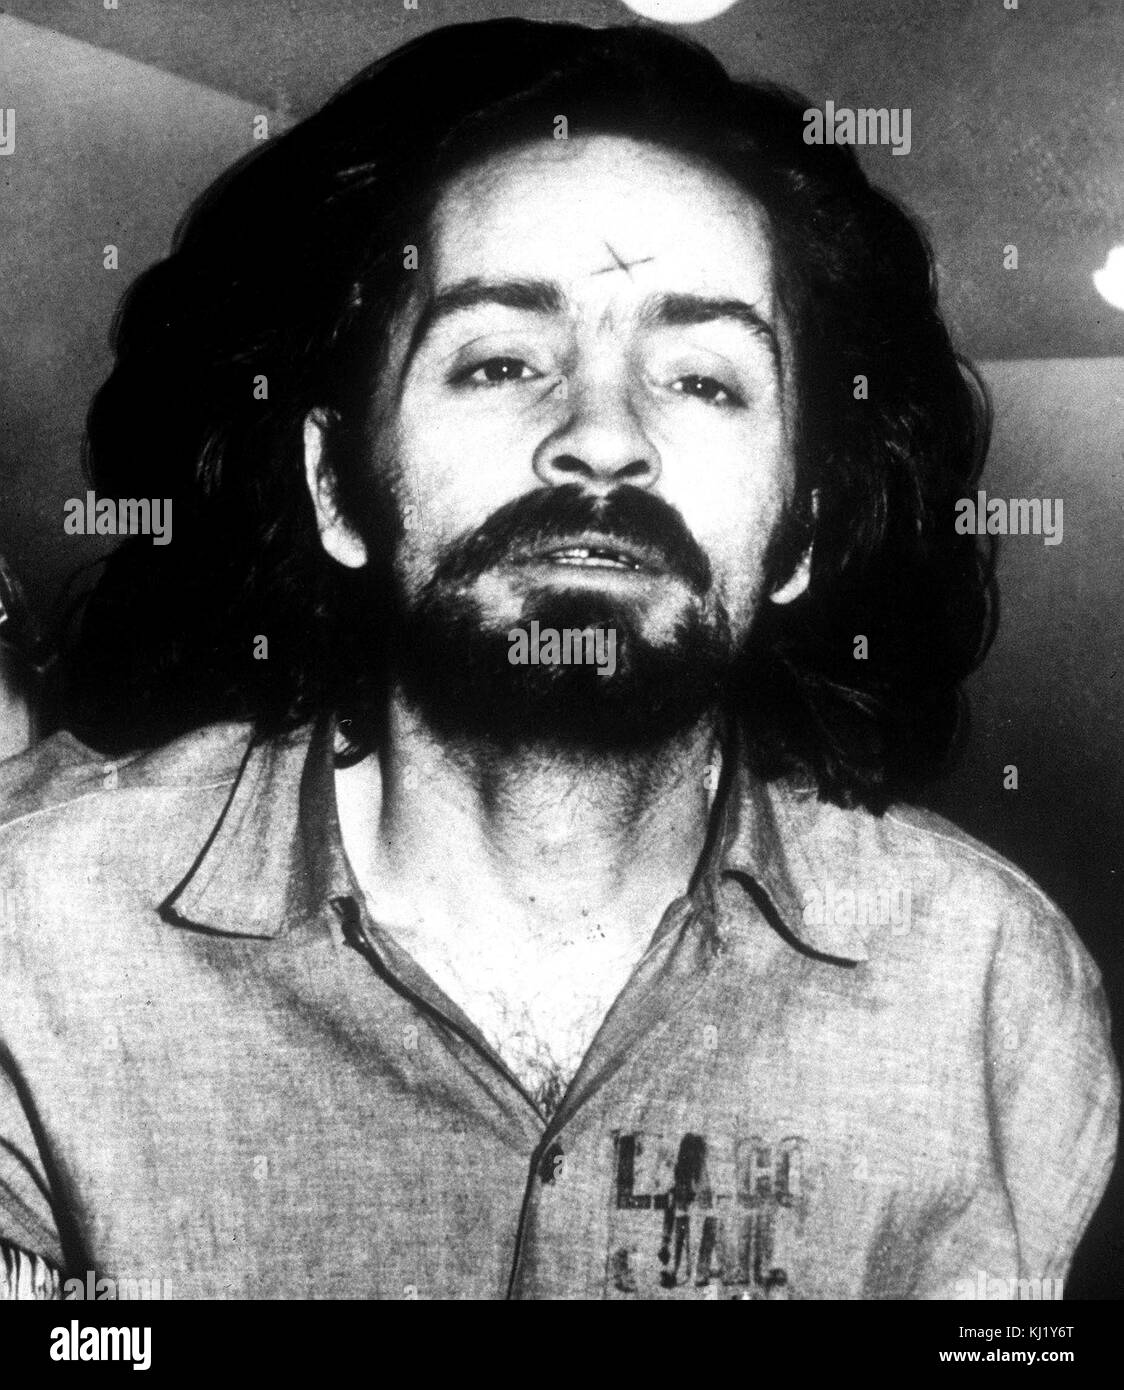 CHARLES MANSON (born Charles Milles Maddox, November 12, 1934 - November 19, 2017) was an American criminal and cult leader who formed what became known as the Manson Family, a quasi-commune in California in the late 1960s. Manson's followers committed a series of nine murders at four locations in July and August 1969. In 1971 he was found guilty of first-degree murder and conspiracy to commit murder for the deaths of seven people, including the actress Sharon Tate, all of which were carried out at his instruction by members of the group. Manson was also convicted of first-degree murder for tw Stock Photo